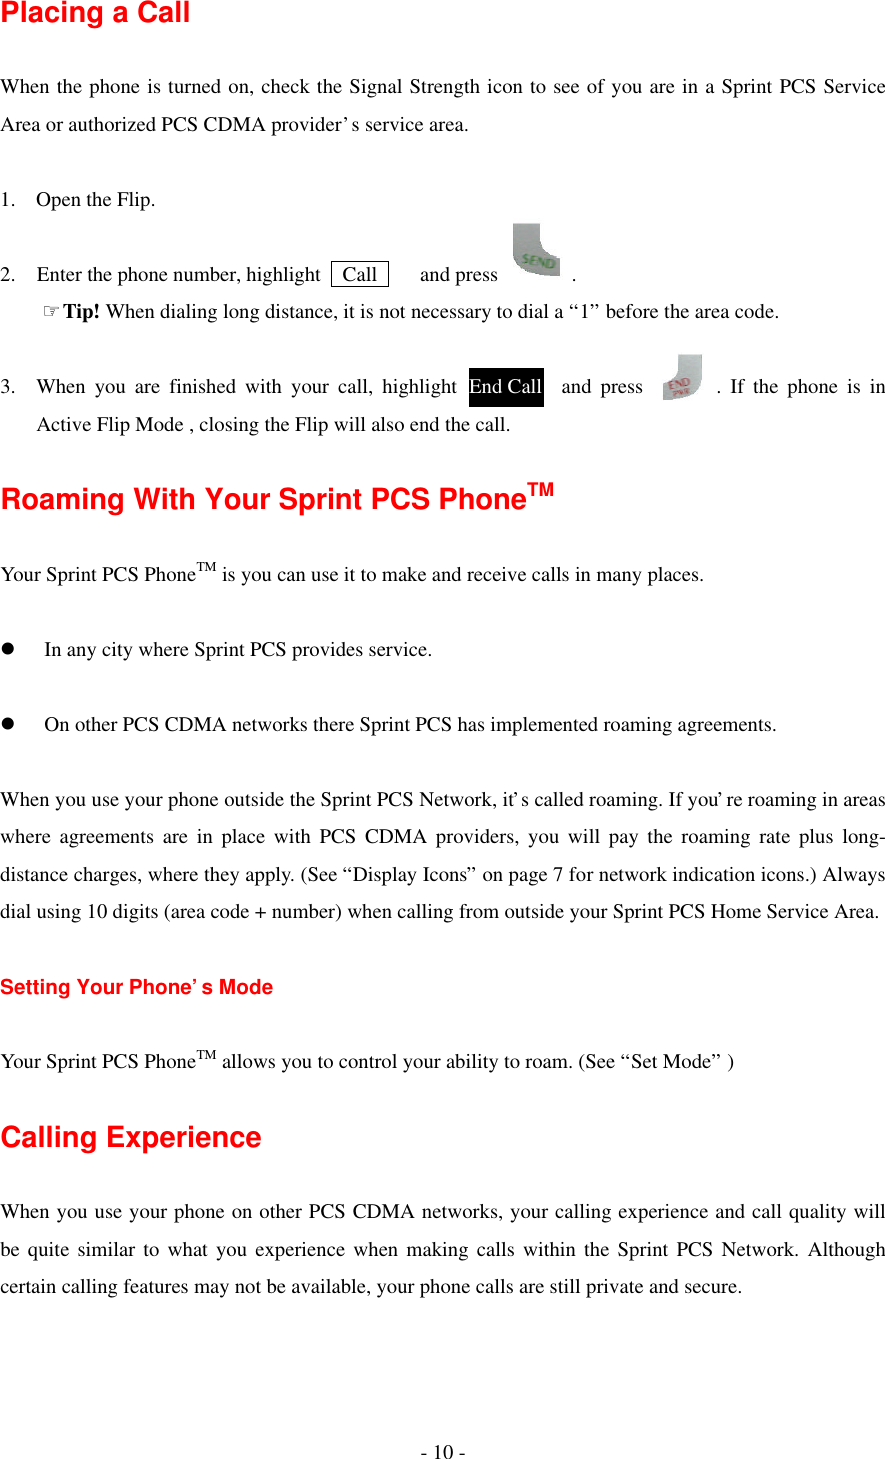 - 10 - Placing a Call  When the phone is turned on, check the Signal Strength icon to see of you are in a Sprint PCS Service Area or authorized PCS CDMA provider’s service area.  1. Open the Flip.  2.  Enter the phone number, highlight   Call    and press       .     ☞Tip! When dialing long distance, it is not necessary to dial a “1” before the area code.  3. When you are finished with your call, highlight          and press       . If the phone is in Active Flip Mode , closing the Flip will also end the call.  Roaming With Your Sprint PCS PhoneTM  Your Sprint PCS PhoneTM is you can use it to make and receive calls in many places.  l  In any city where Sprint PCS provides service.  l  On other PCS CDMA networks there Sprint PCS has implemented roaming agreements.  When you use your phone outside the Sprint PCS Network, it’s called roaming. If you’re roaming in areas where agreements are in place with PCS CDMA providers, you will pay the roaming rate plus long-distance charges, where they apply. (See “Display Icons” on page 7 for network indication icons.) Always dial using 10 digits (area code + number) when calling from outside your Sprint PCS Home Service Area.  Setting Your Phone’s Mode  Your Sprint PCS PhoneTM allows you to control your ability to roam. (See “Set Mode” )  Calling Experience  When you use your phone on other PCS CDMA networks, your calling experience and call quality will be quite similar to what you experience when making calls within the Sprint PCS Network. Although certain calling features may not be available, your phone calls are still private and secure.  End Call Call 